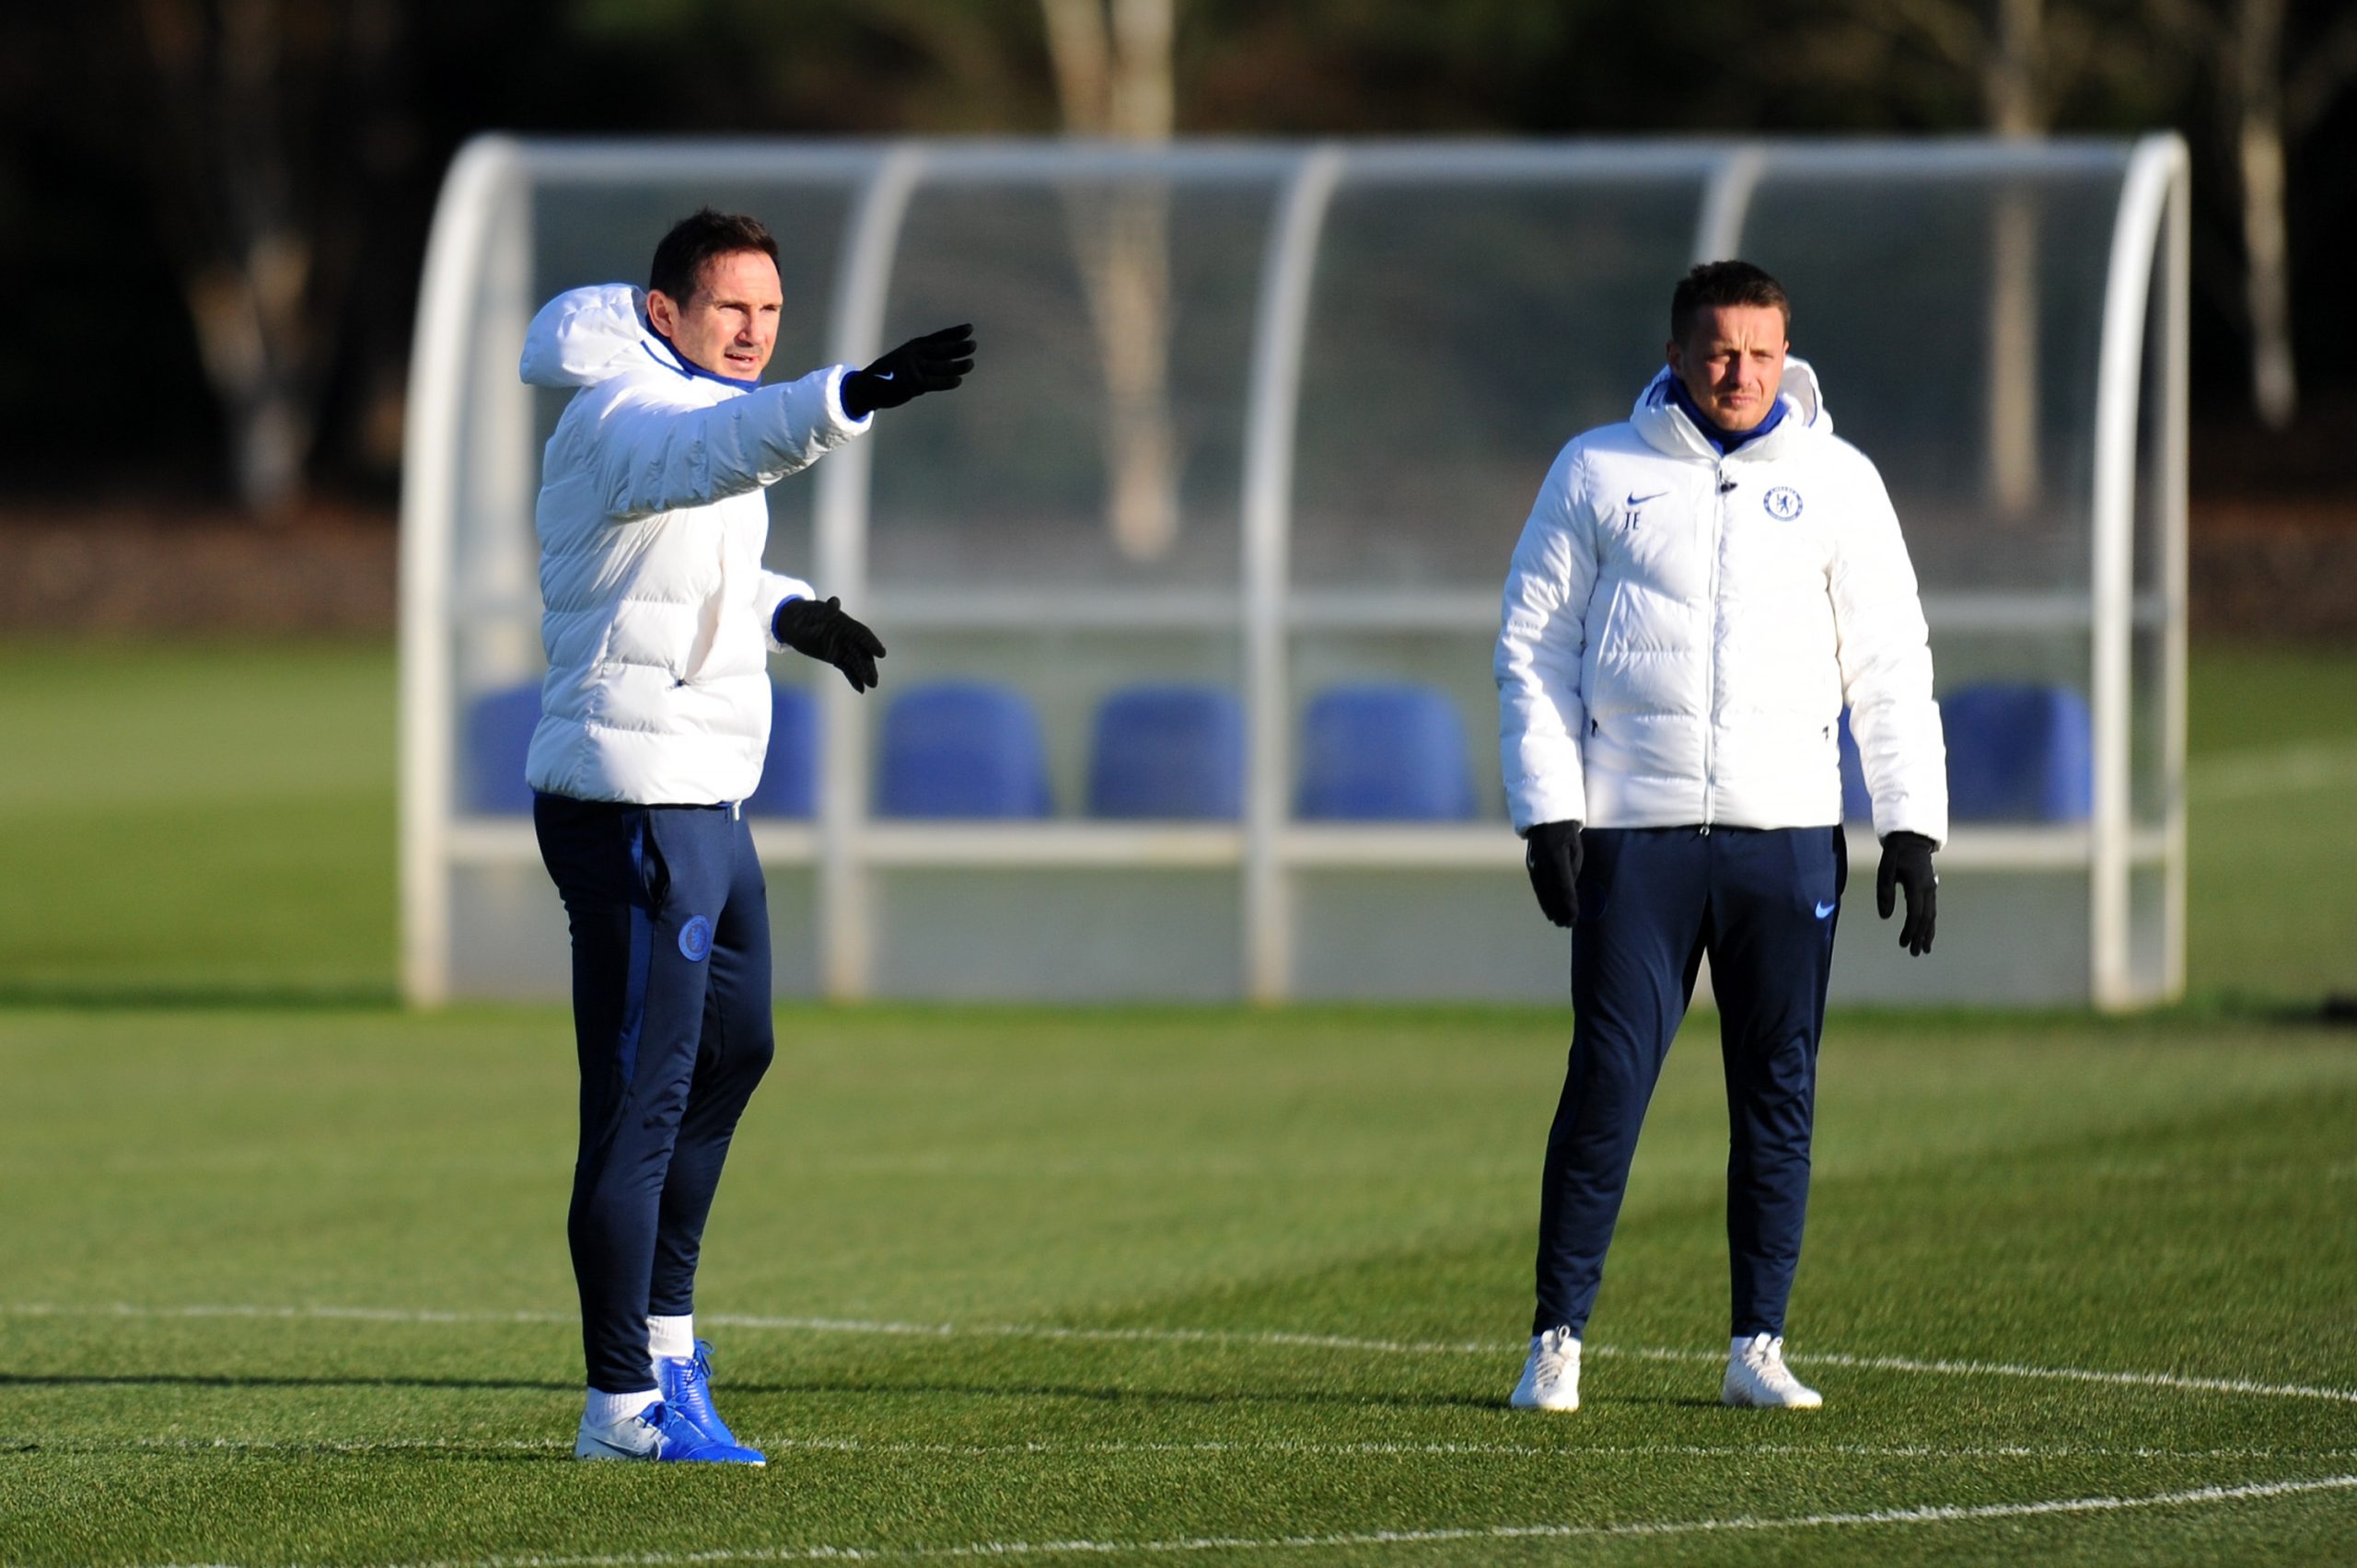 Ian Wright claims he is worried about Frank Lampard returning to Chelsea.